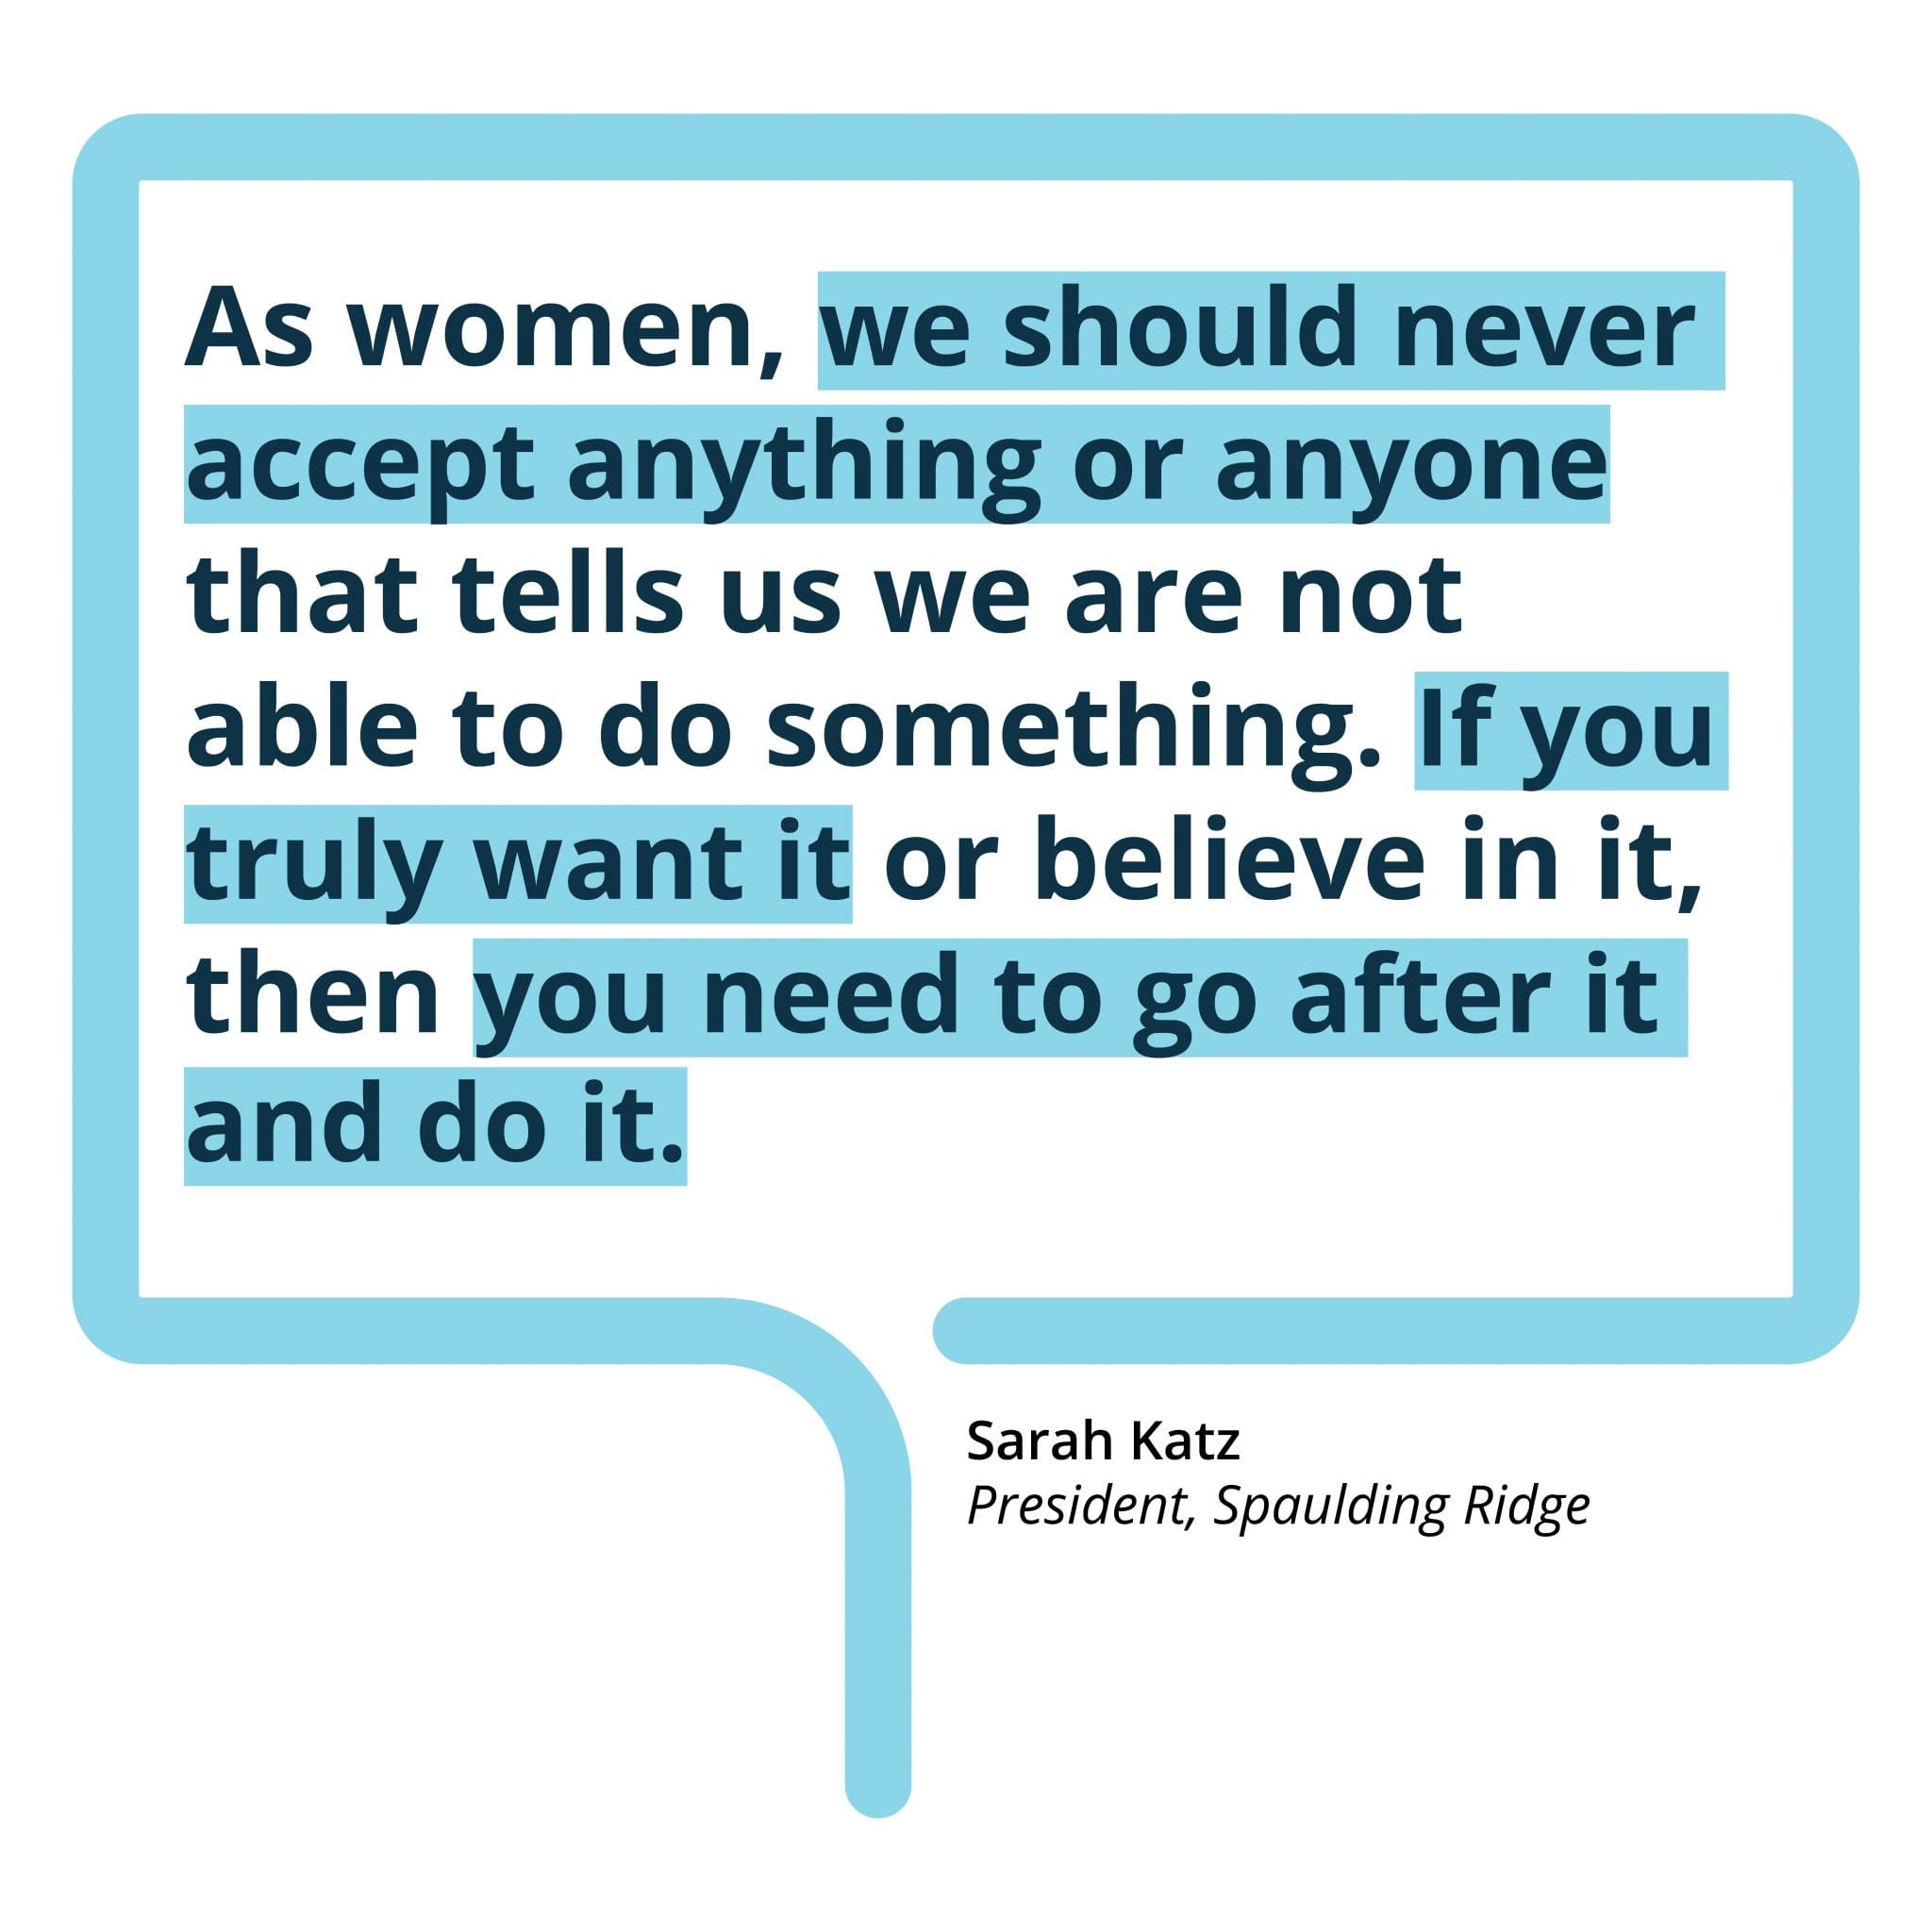 As women, we should never accept anything or anyone that tells us we are not able to do something. If you truly want it or believe in it, then you need to go after it and do it.